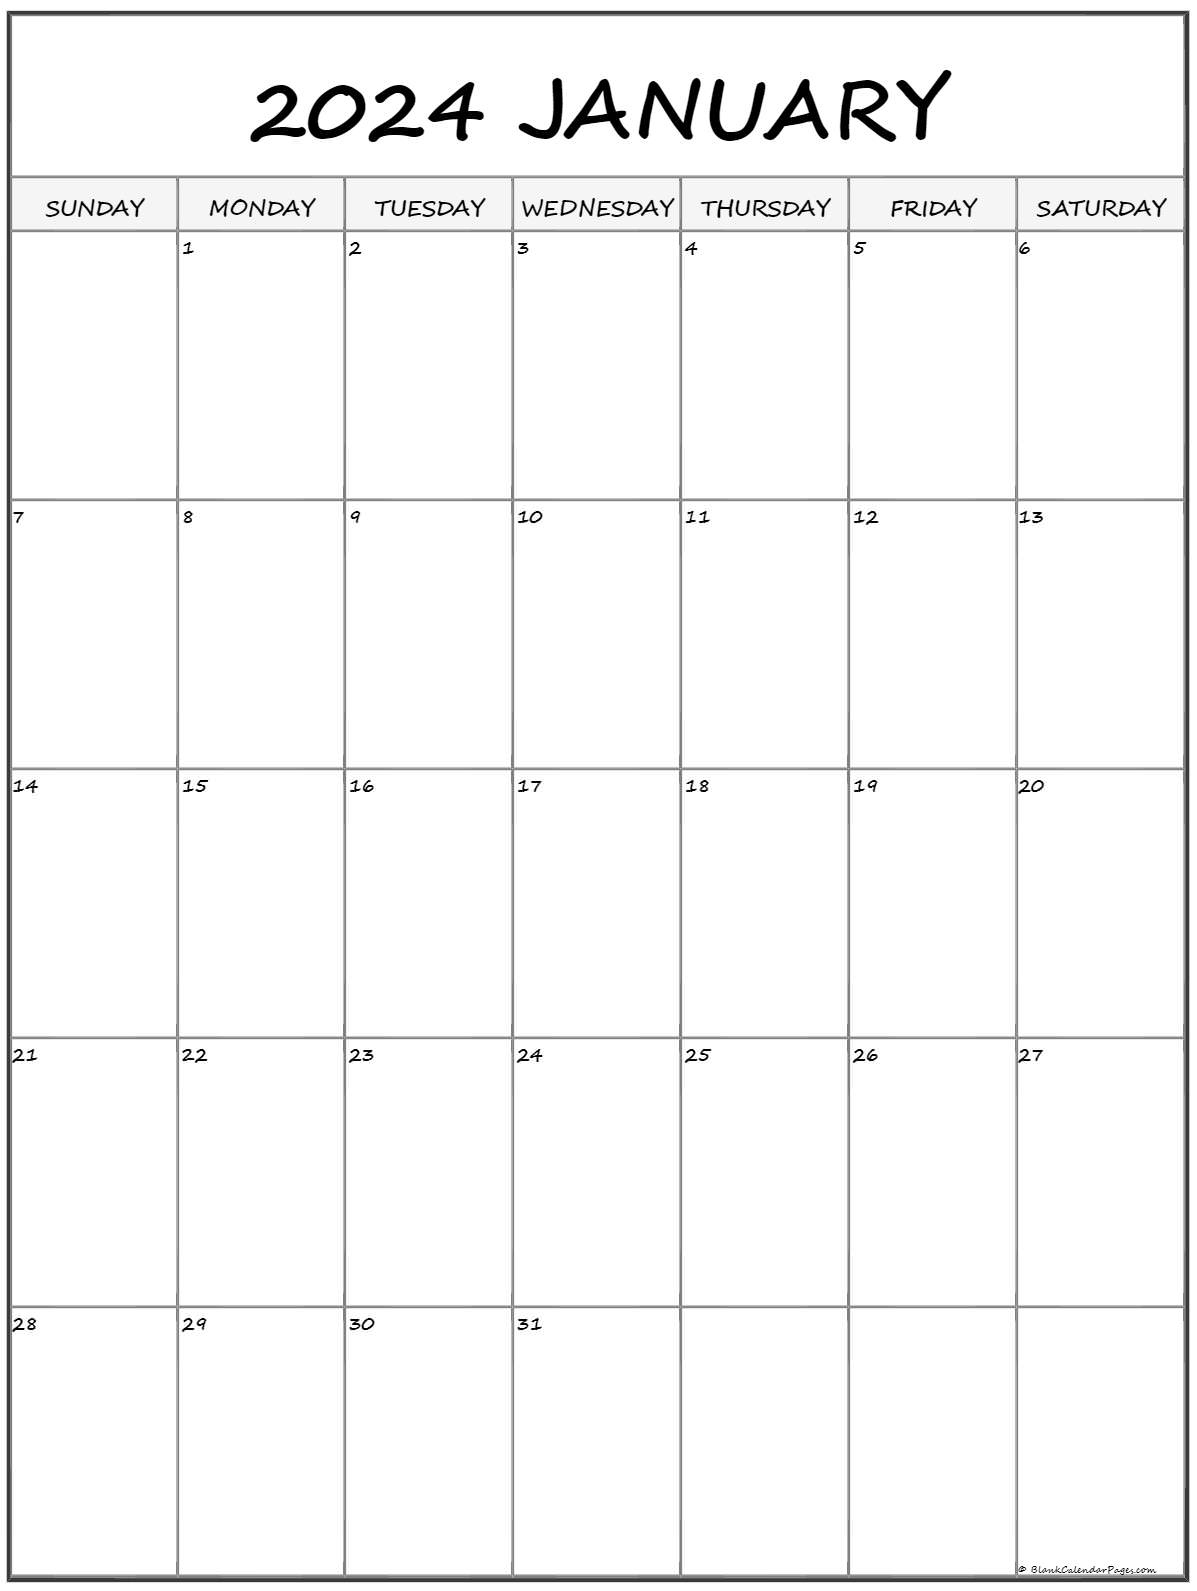 2024 Printable Calendar By Month Vertical And Mandy Rozelle - Free Printable 2024 Calendar With Blank Side For Notes